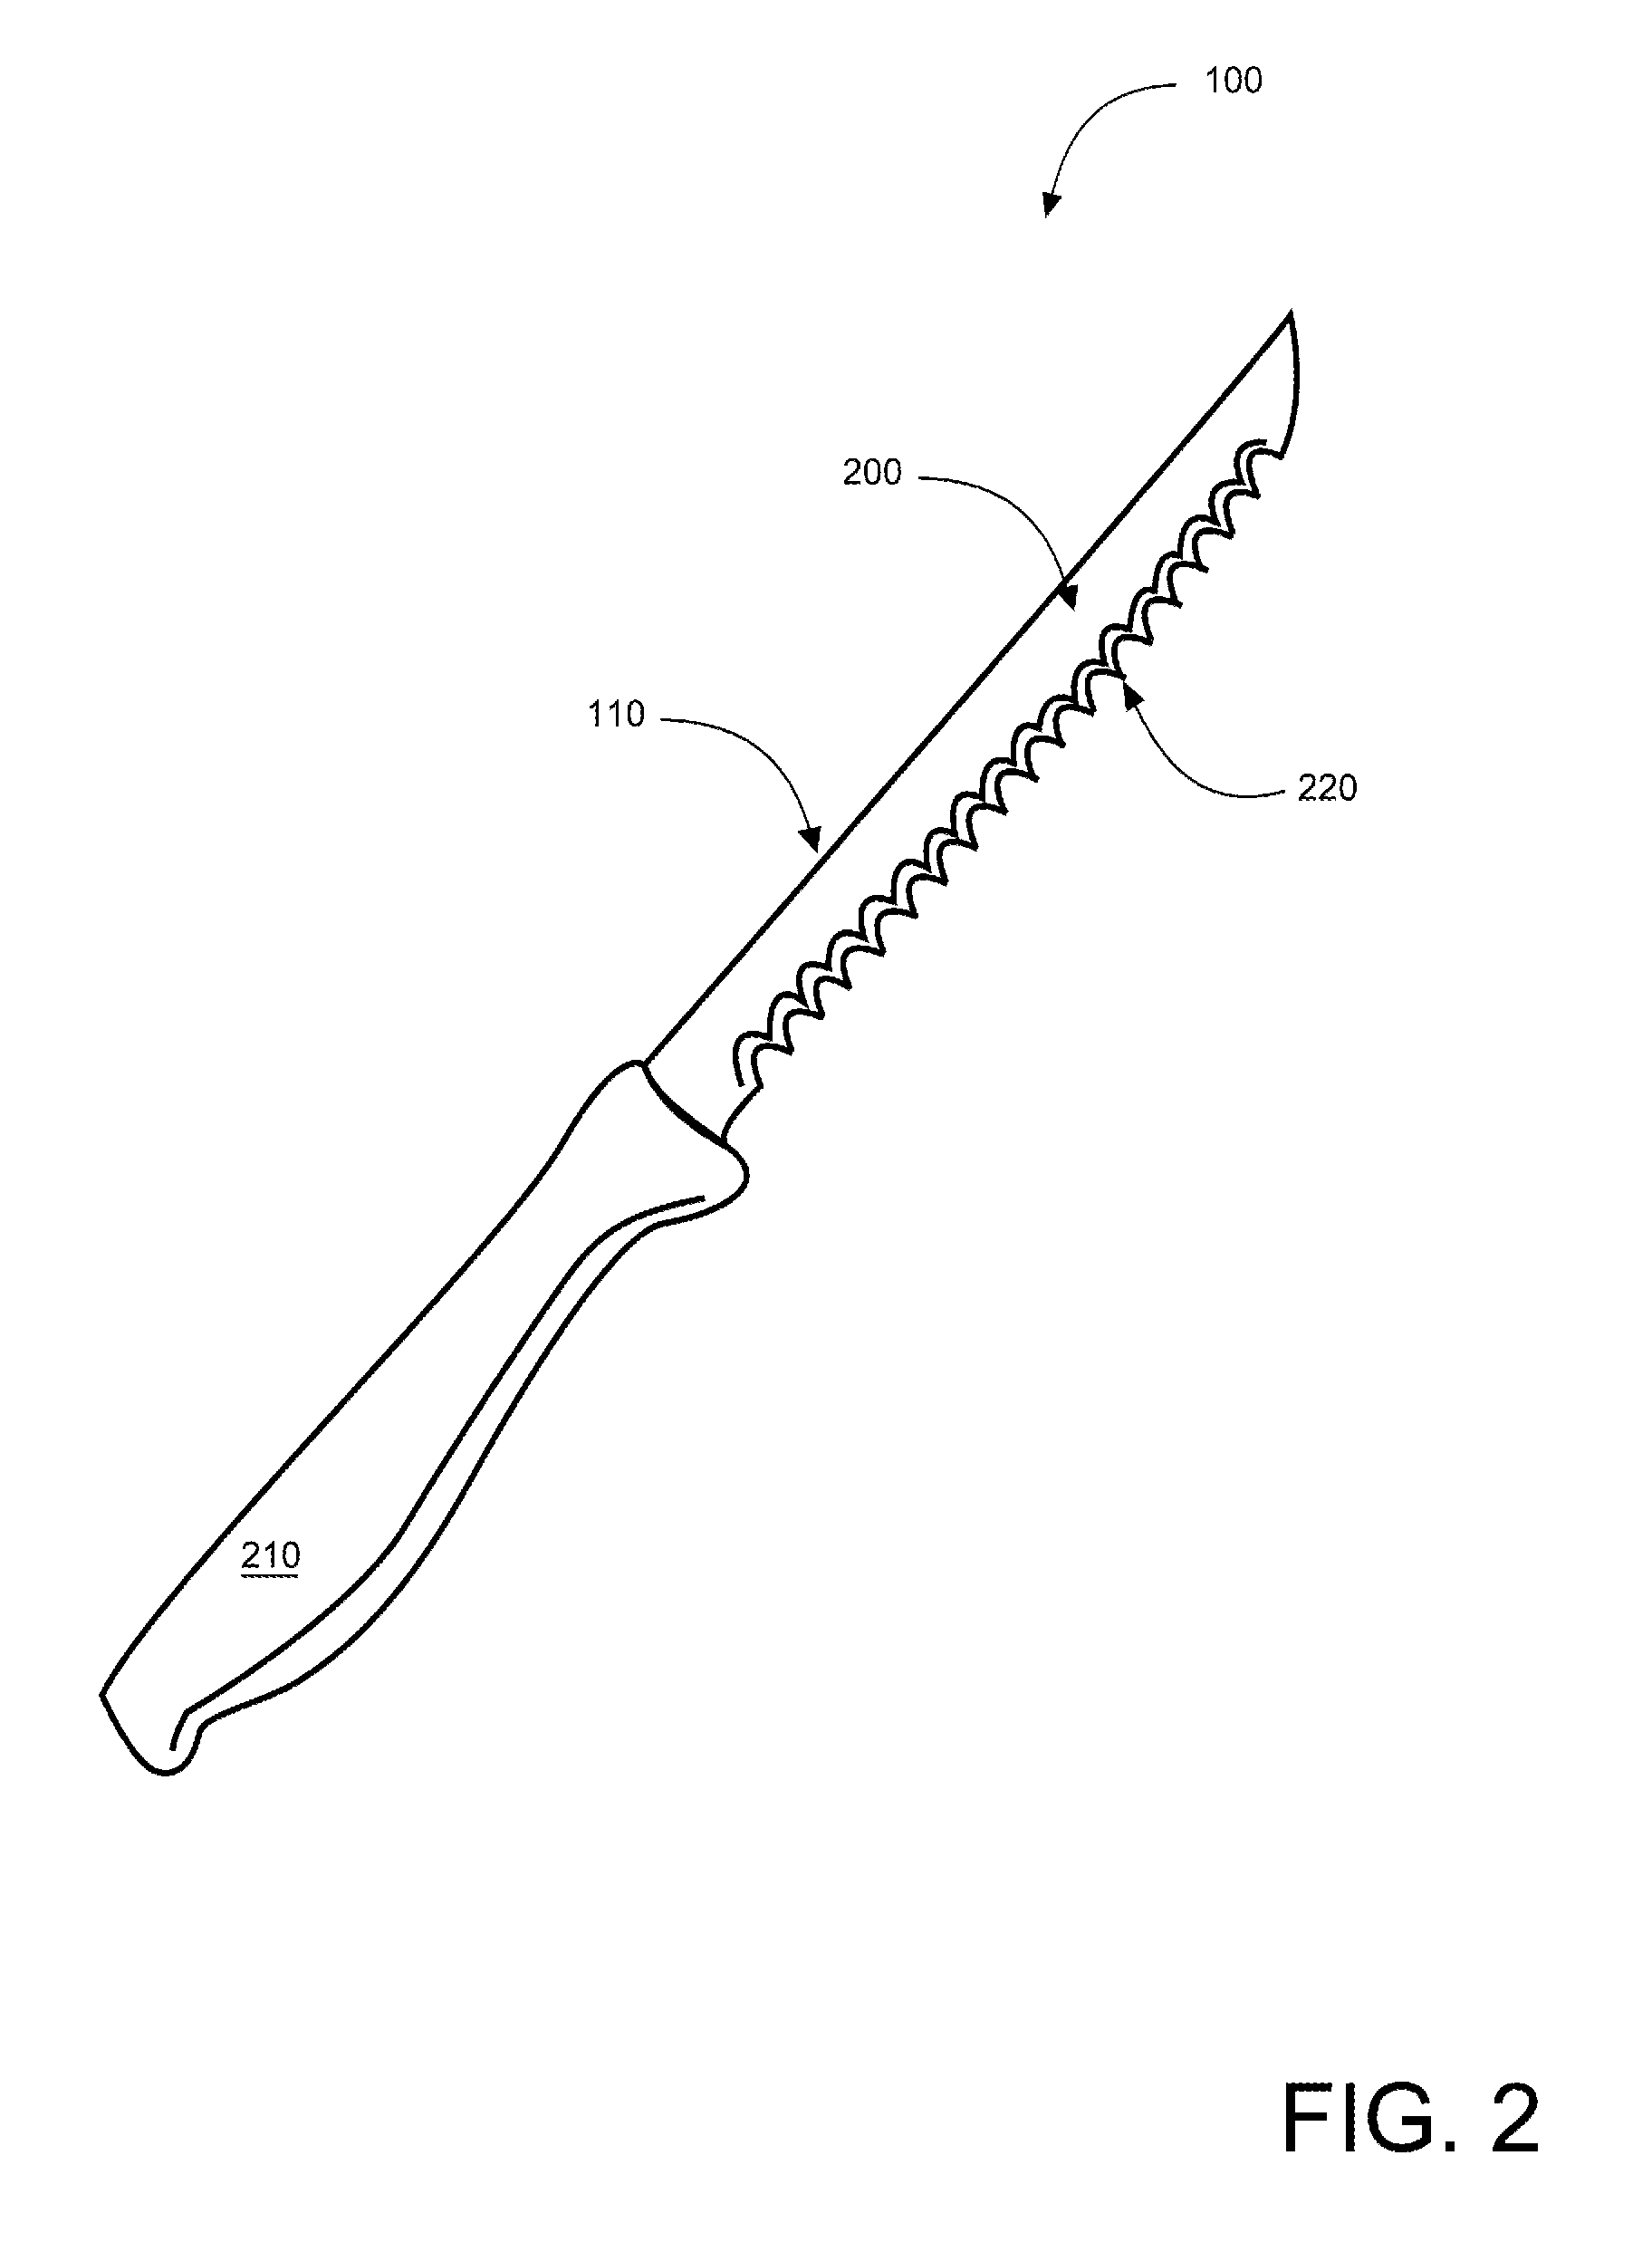 Left handed knives systems